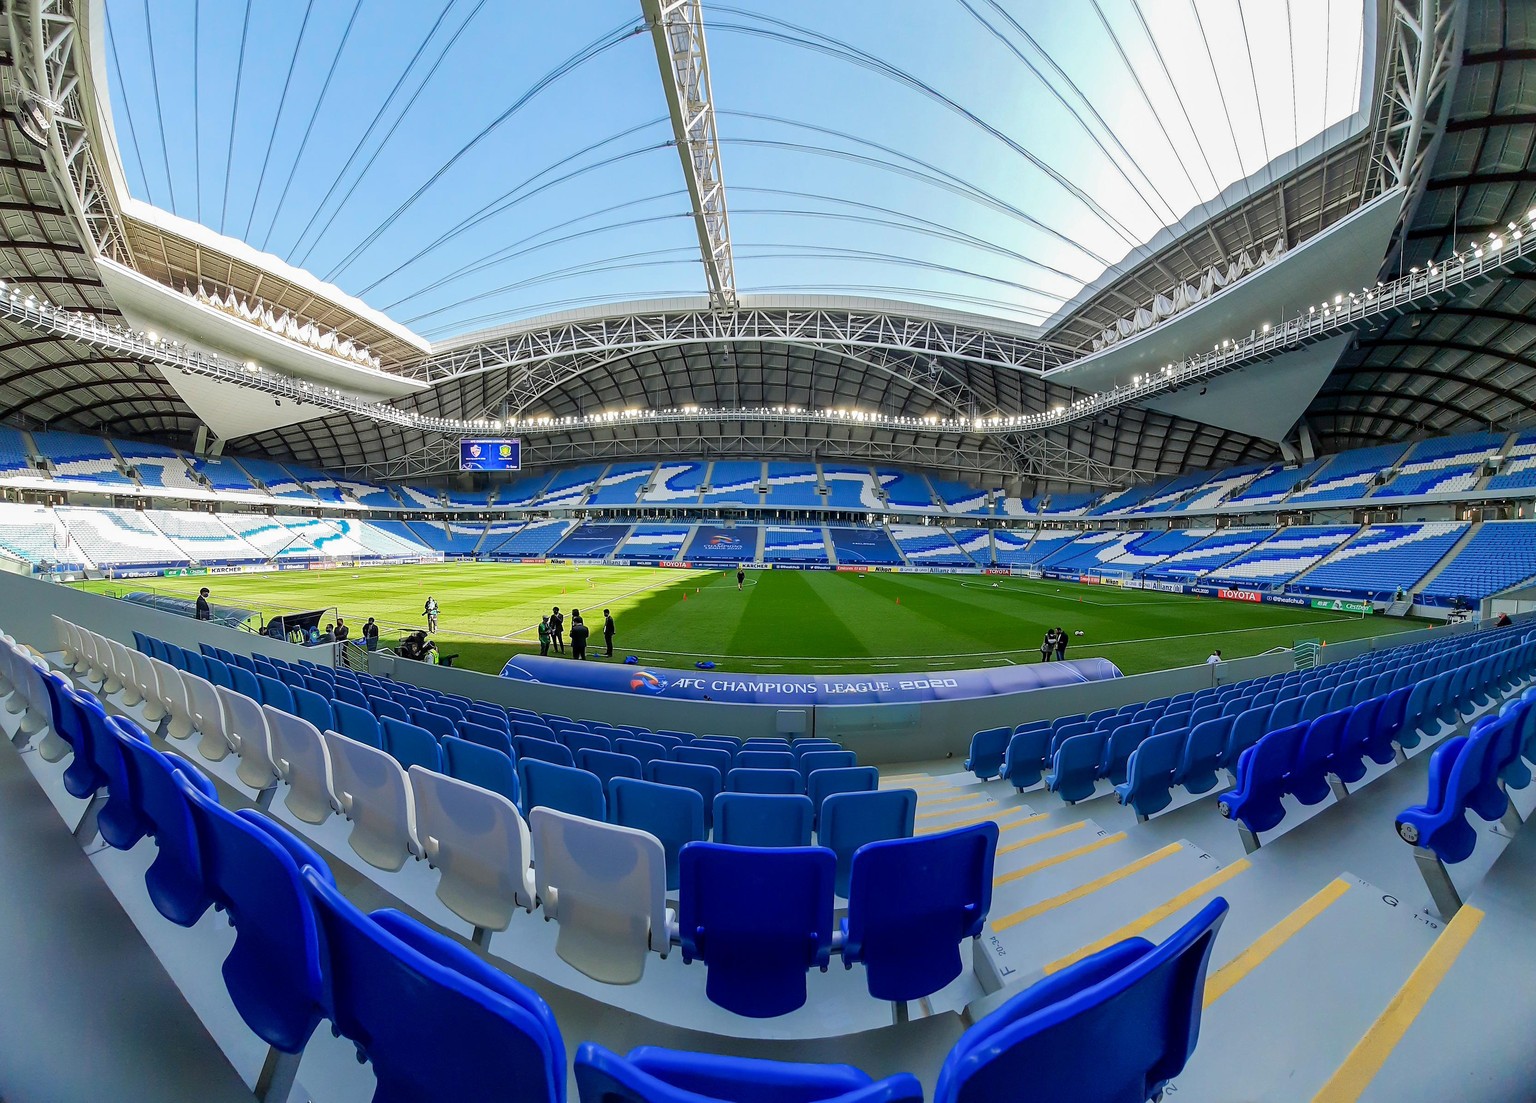 Al Wakrah, Qatar - December 2020: Al Janoub Stadium, is a football stadium in Al-Wakrah. This is the second among the eight stadiums for the 2022 FIFA World Cup. The inside view of the stadium.